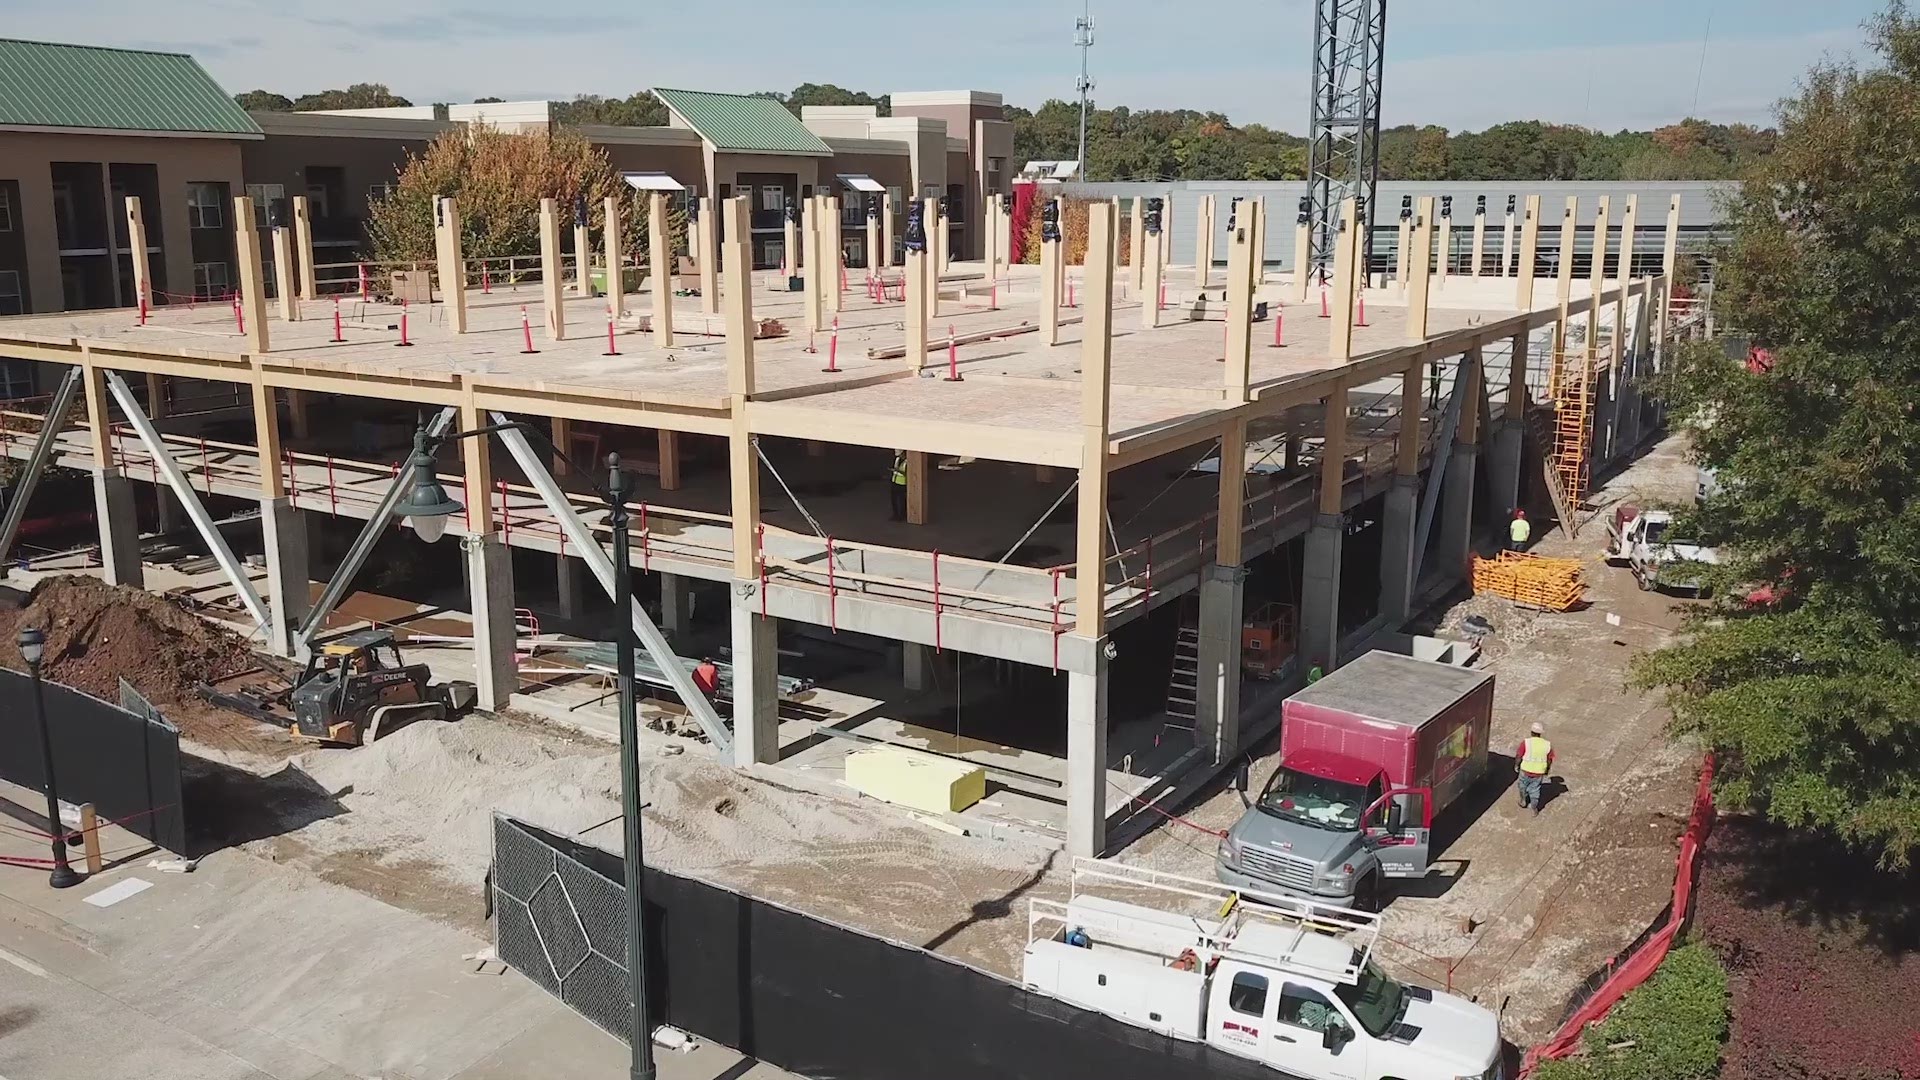 T3 West Midtown is the region’s first timber-framed office project.